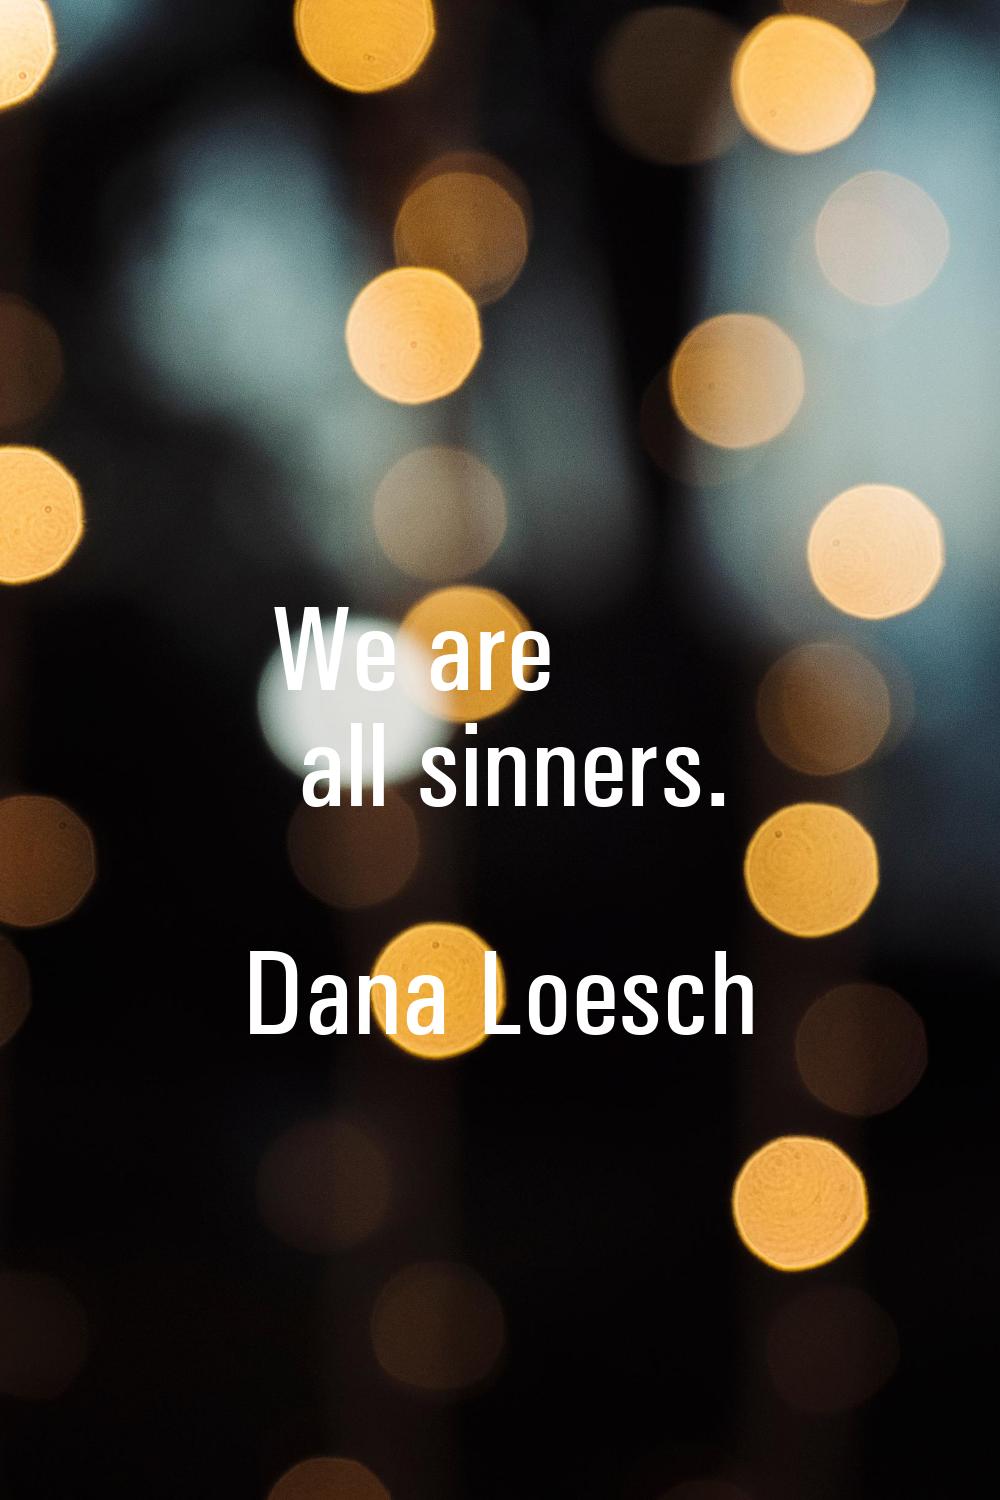 We are all sinners.